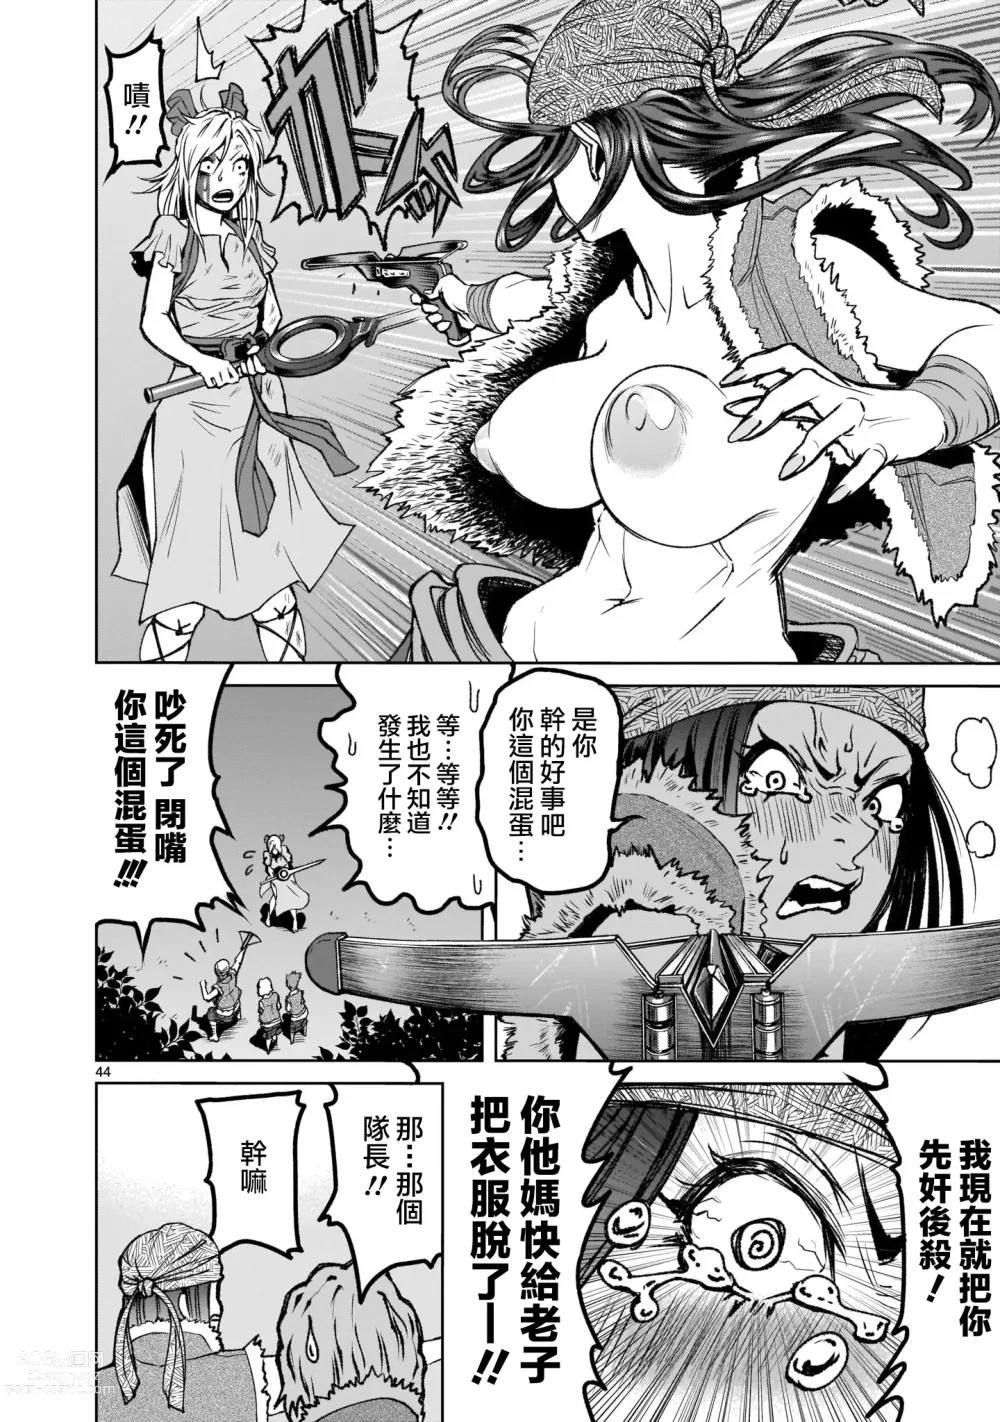 Page 40 of doujinshi 蔷薇园传奇 01Chinese